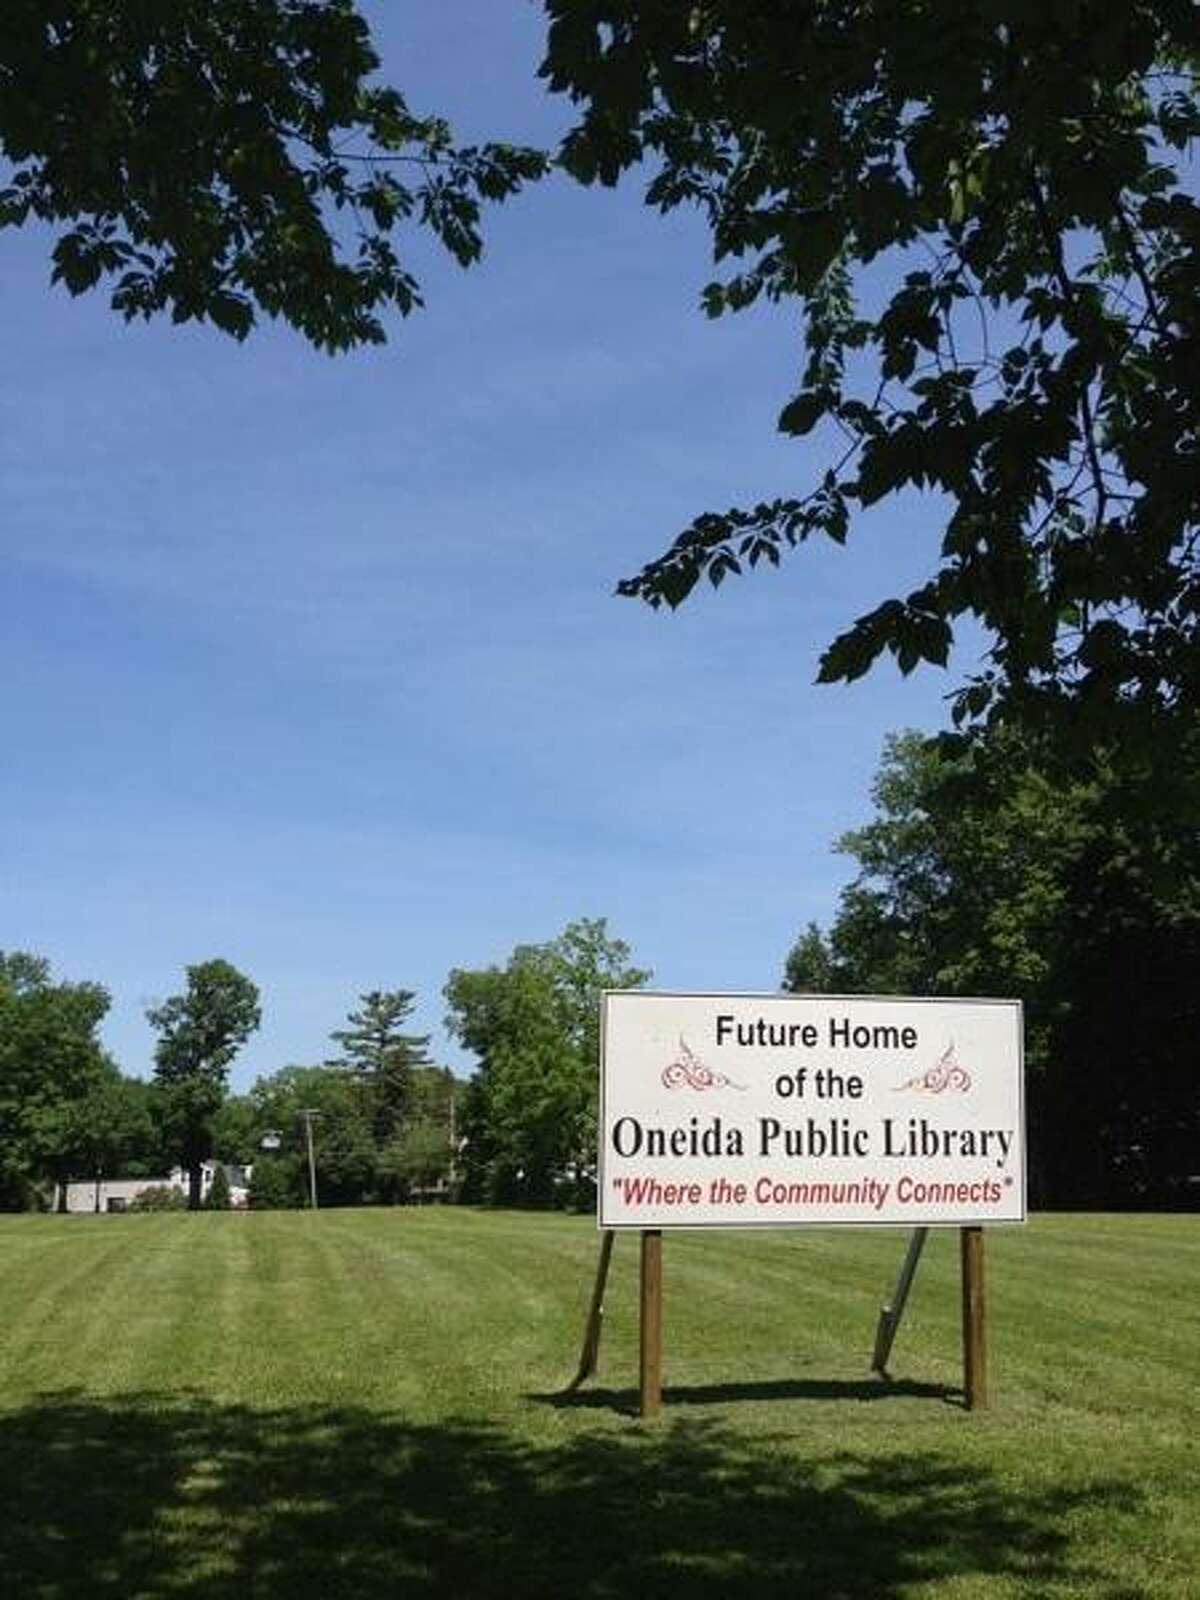 JOHN HAEGER @ONEIDAPHOTO ON TWITTER/ONEIDA DAILY DISPATCH The future site of the Oneida Public Library on Friday, June 21v 2013.